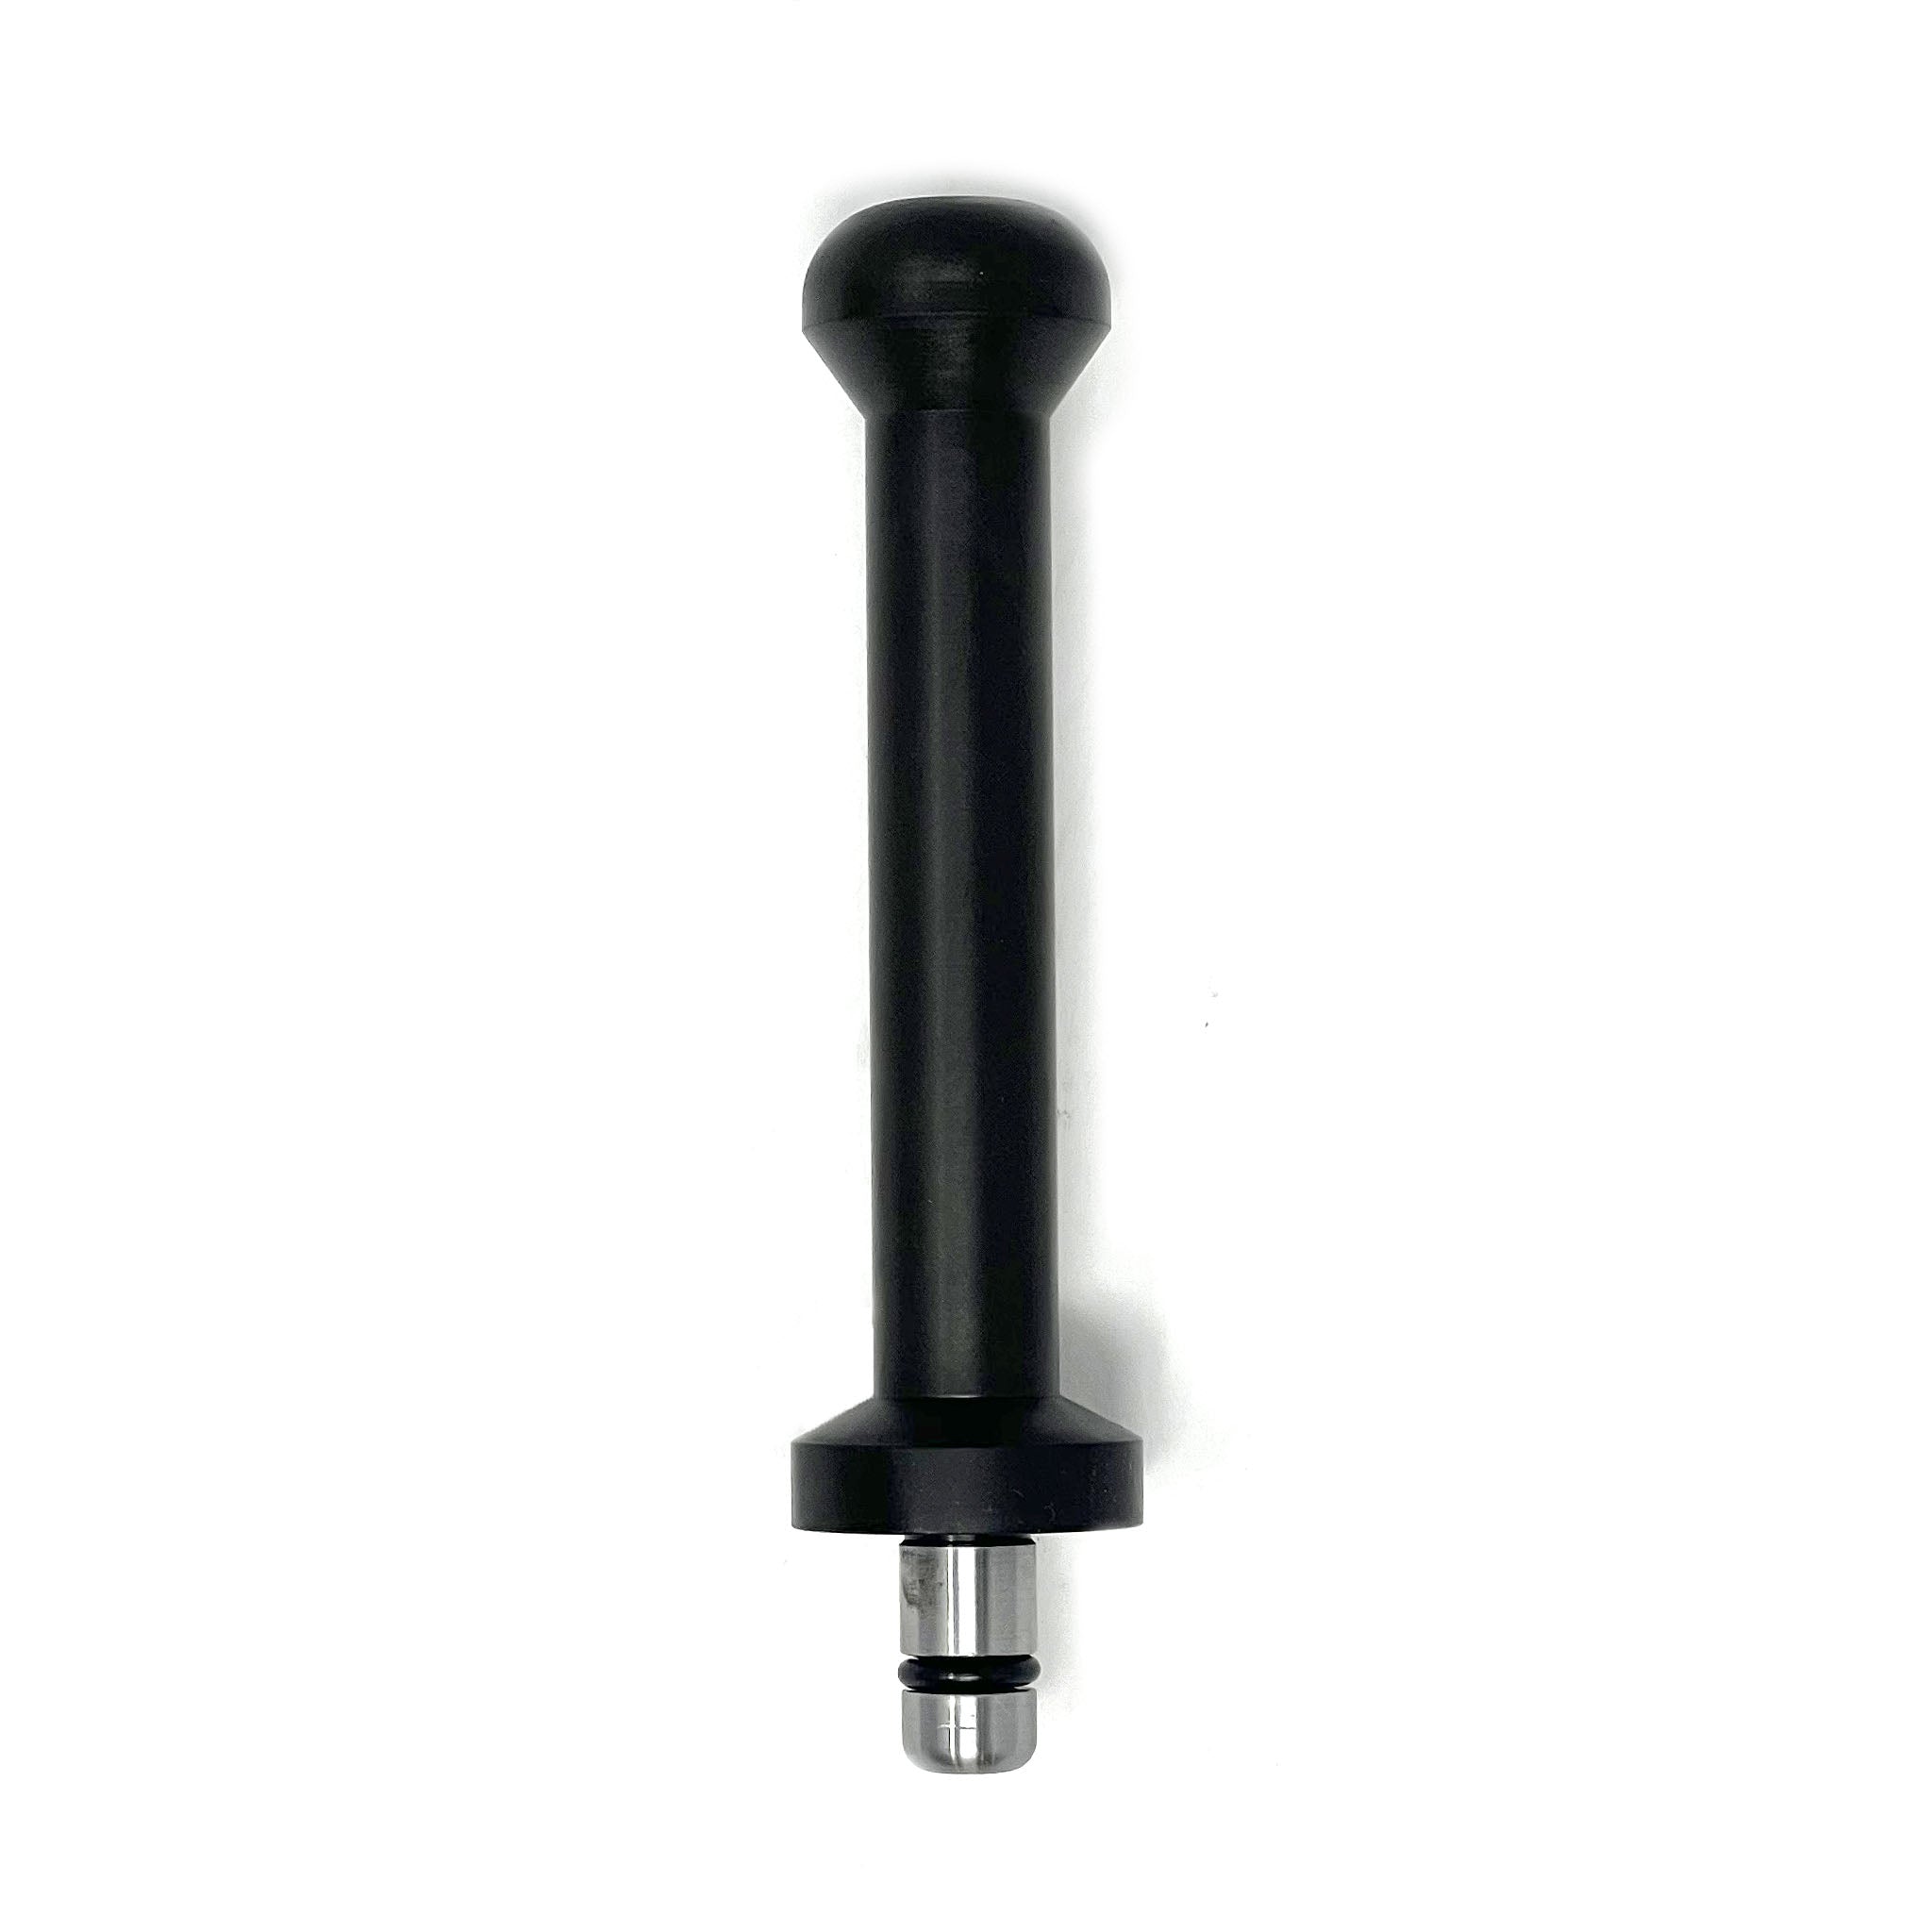 Round top Stud (C) for pin plate 4.1" Long for Wheel Balancer